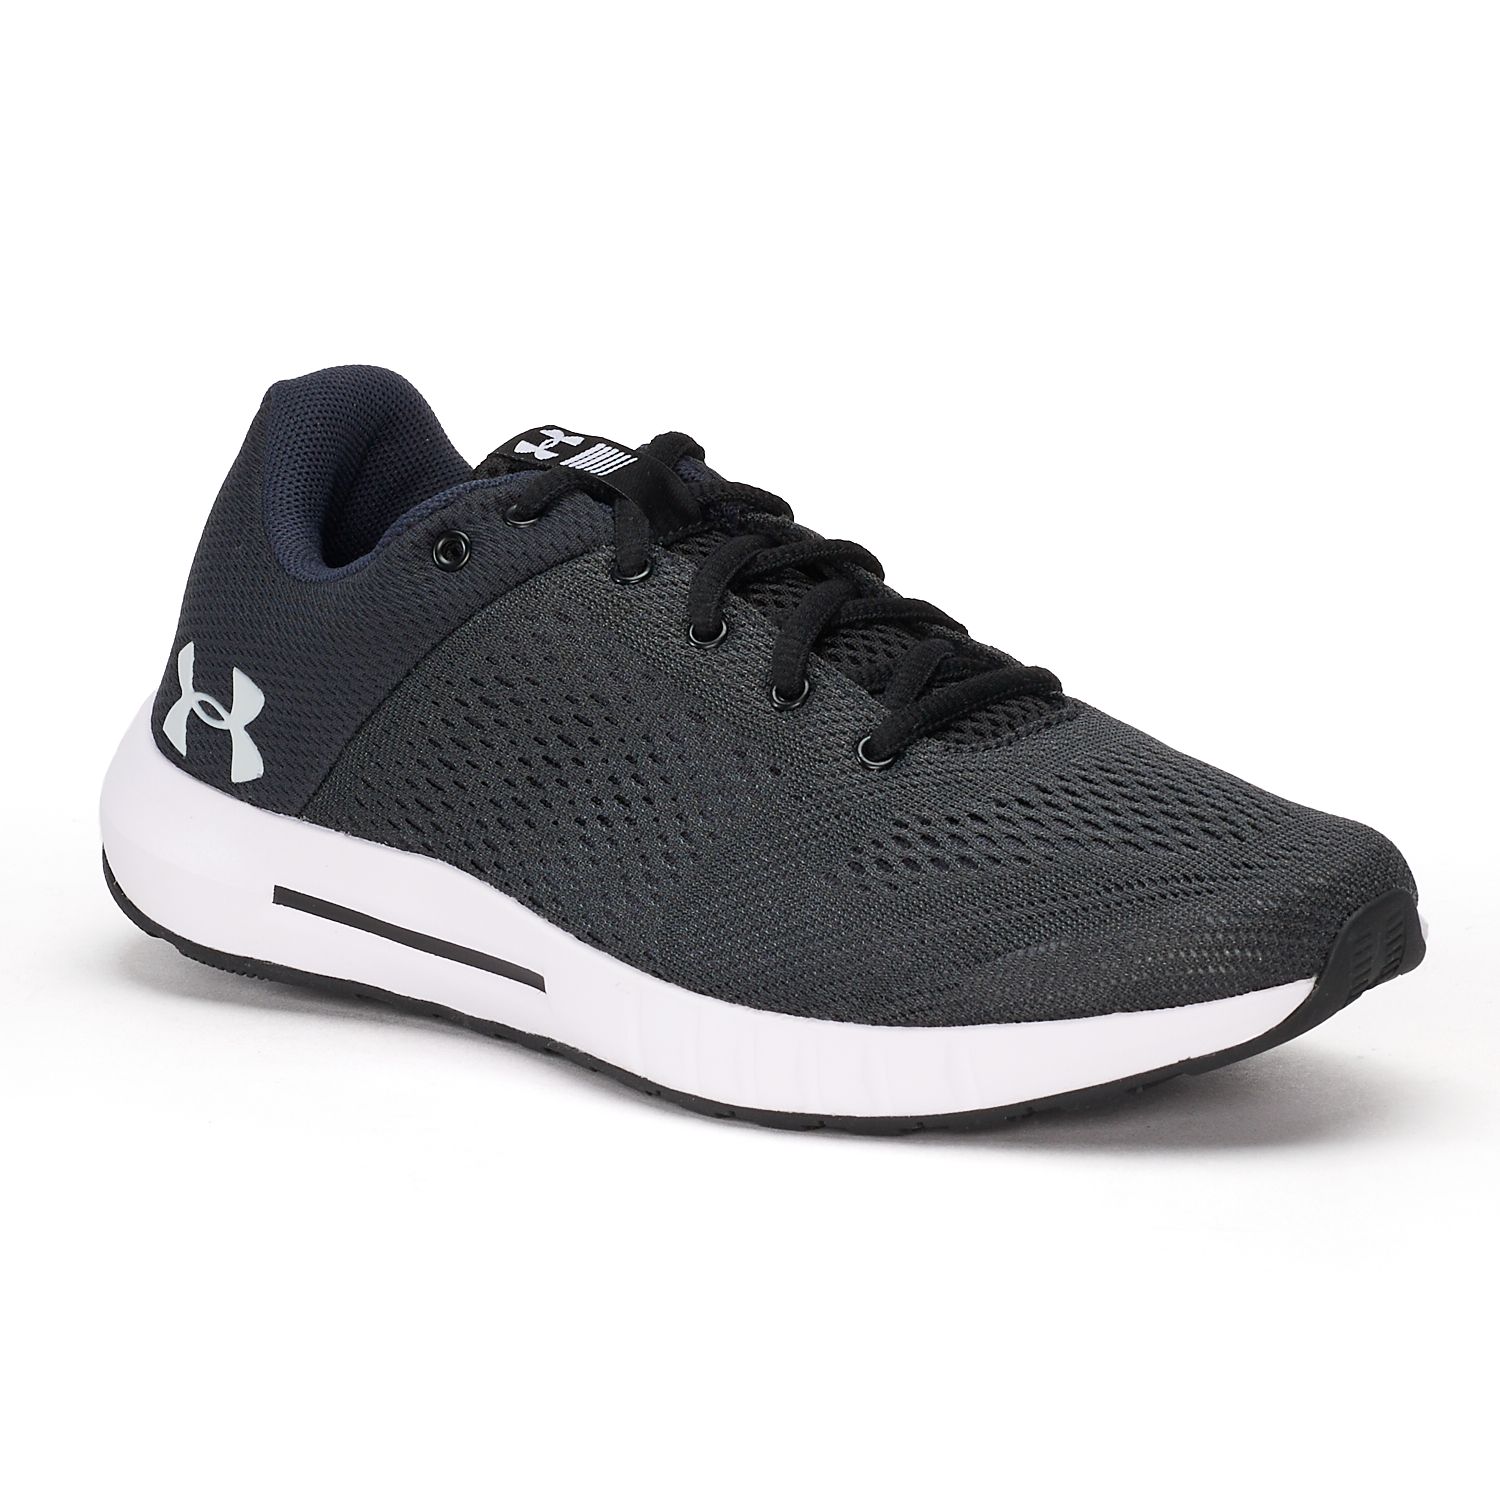 Micro G Pursuit Women's Running Shoes